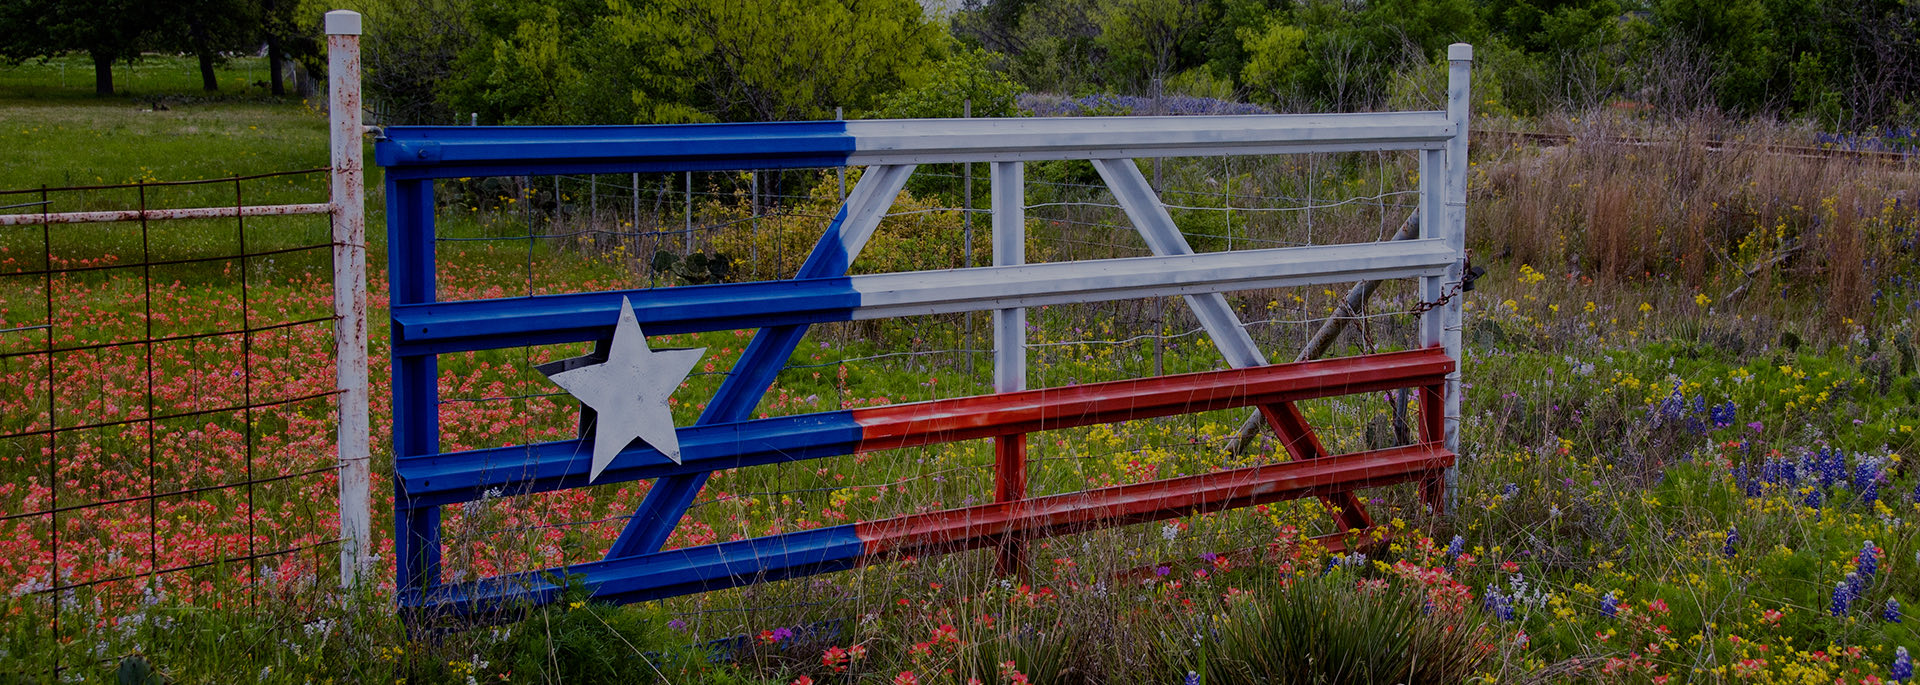 view of a fence painted in american flag colors